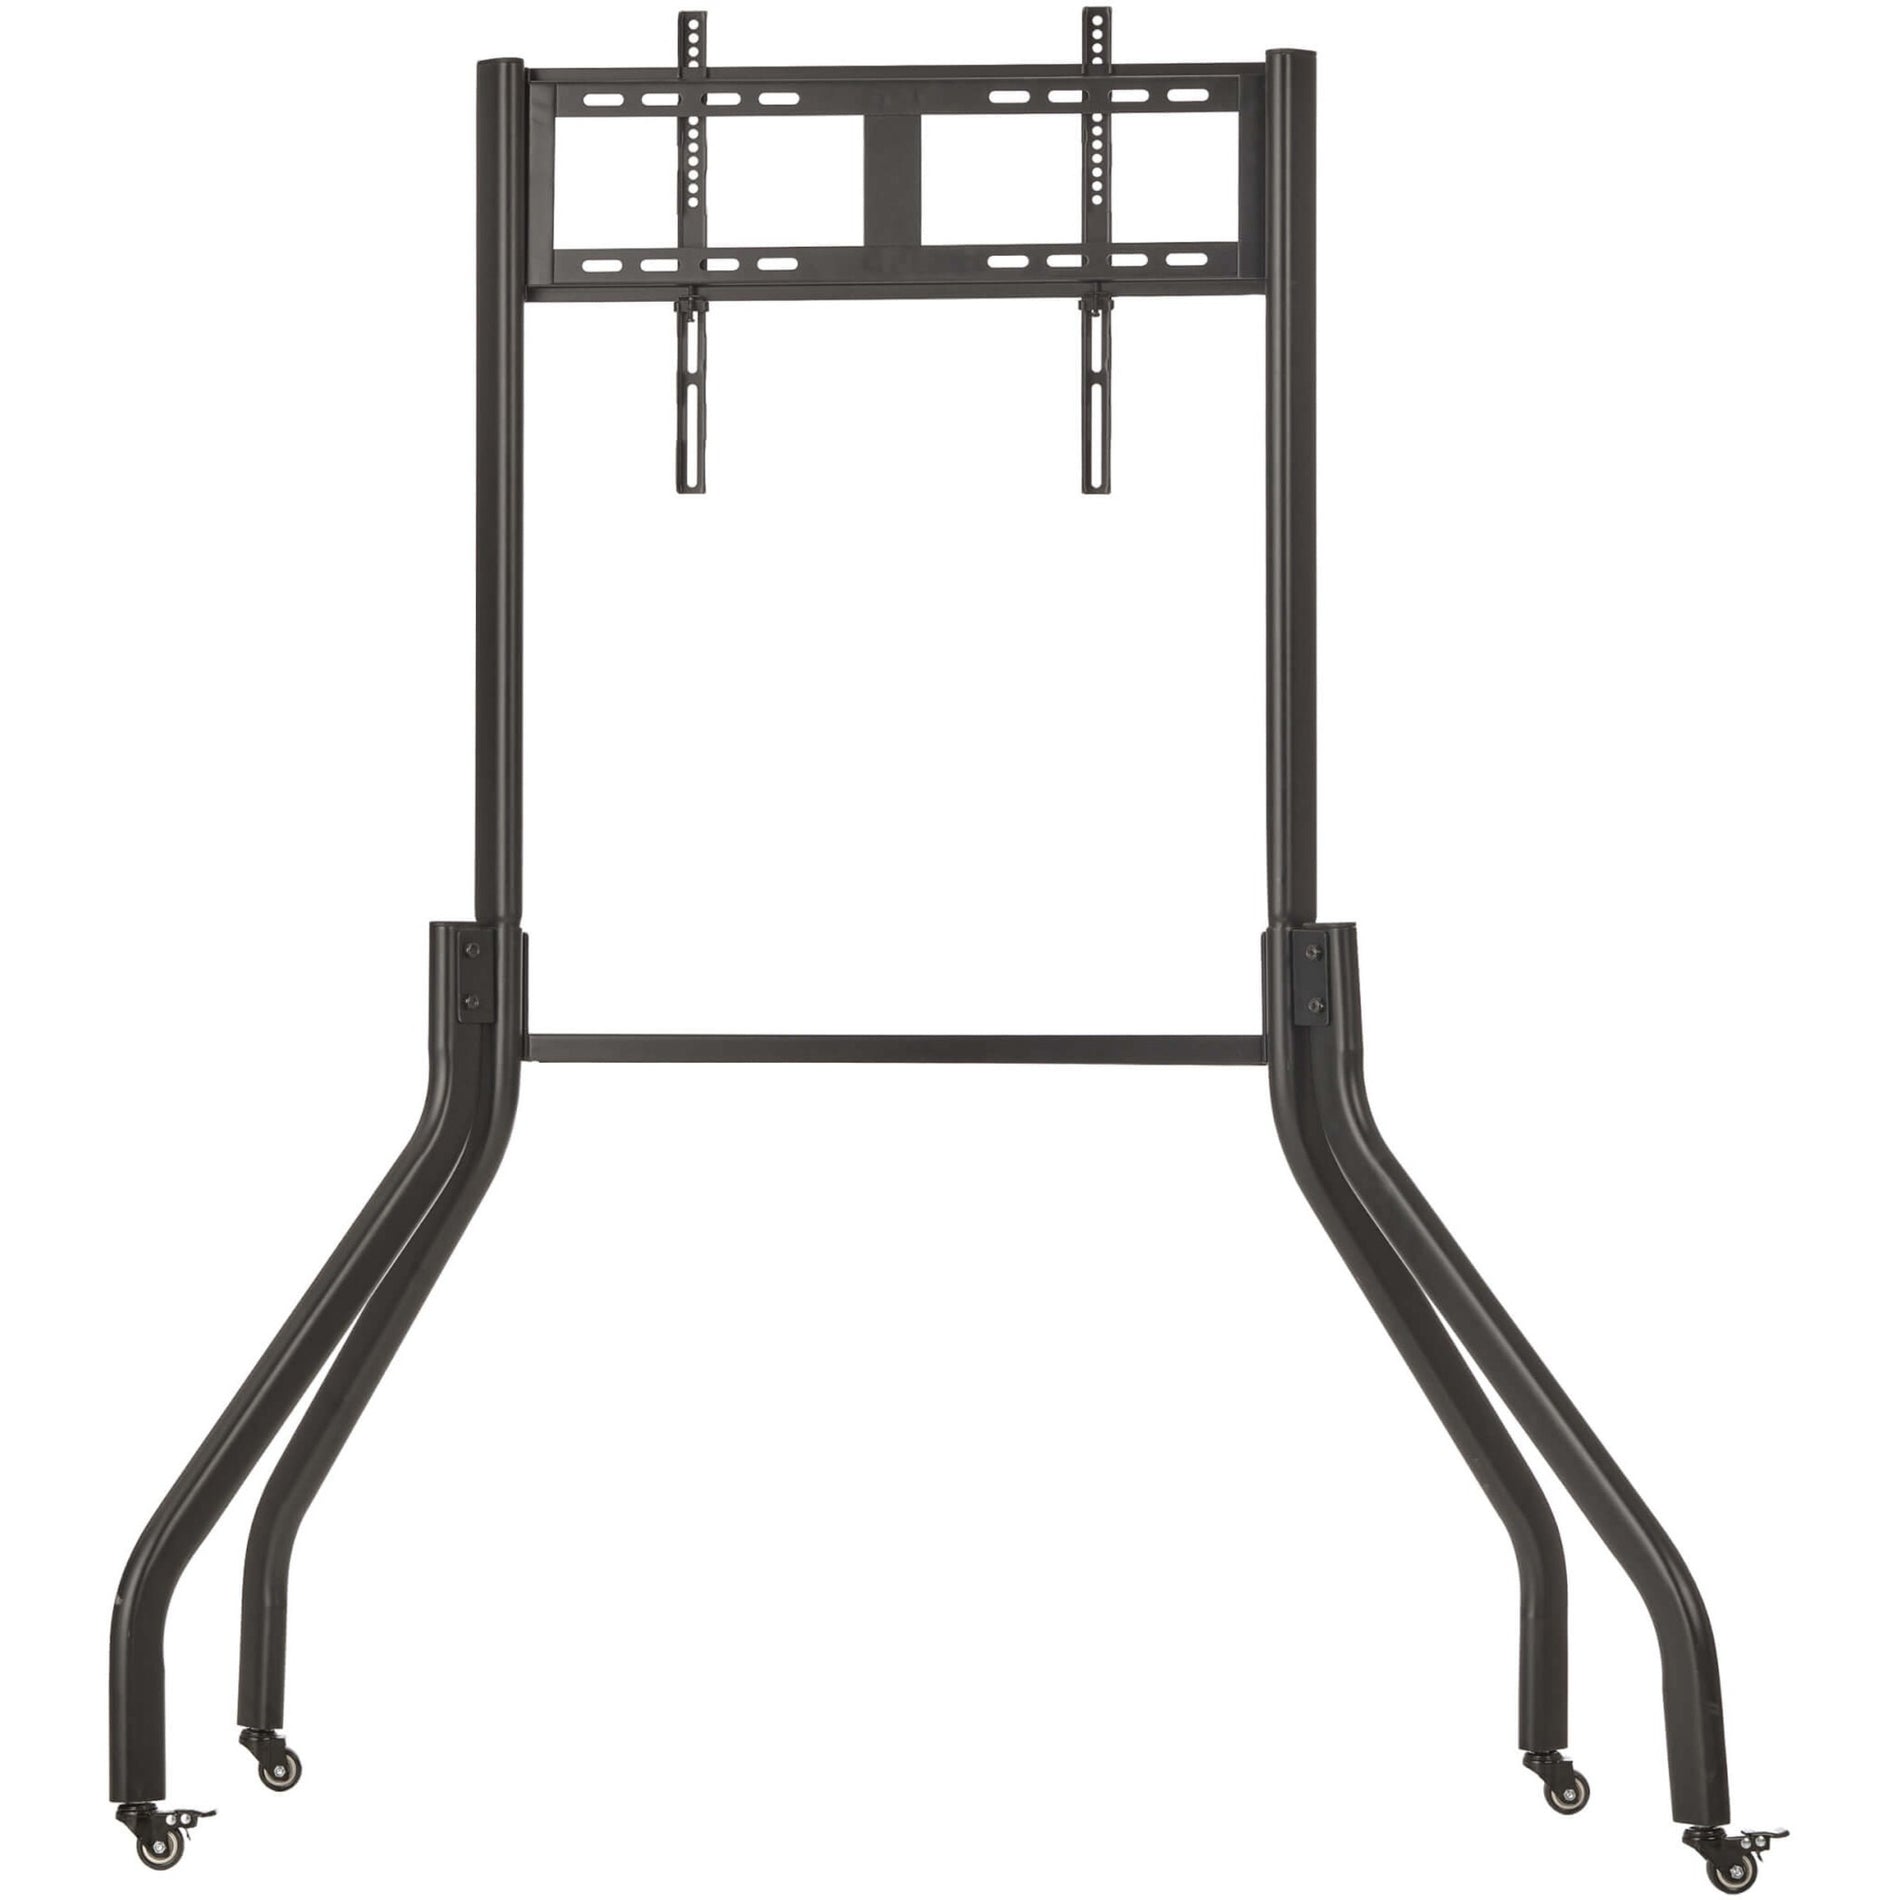 Rolling TV Cart for 42" to 65" Displays, Wide Legs, Locking Casters [Discontinued]